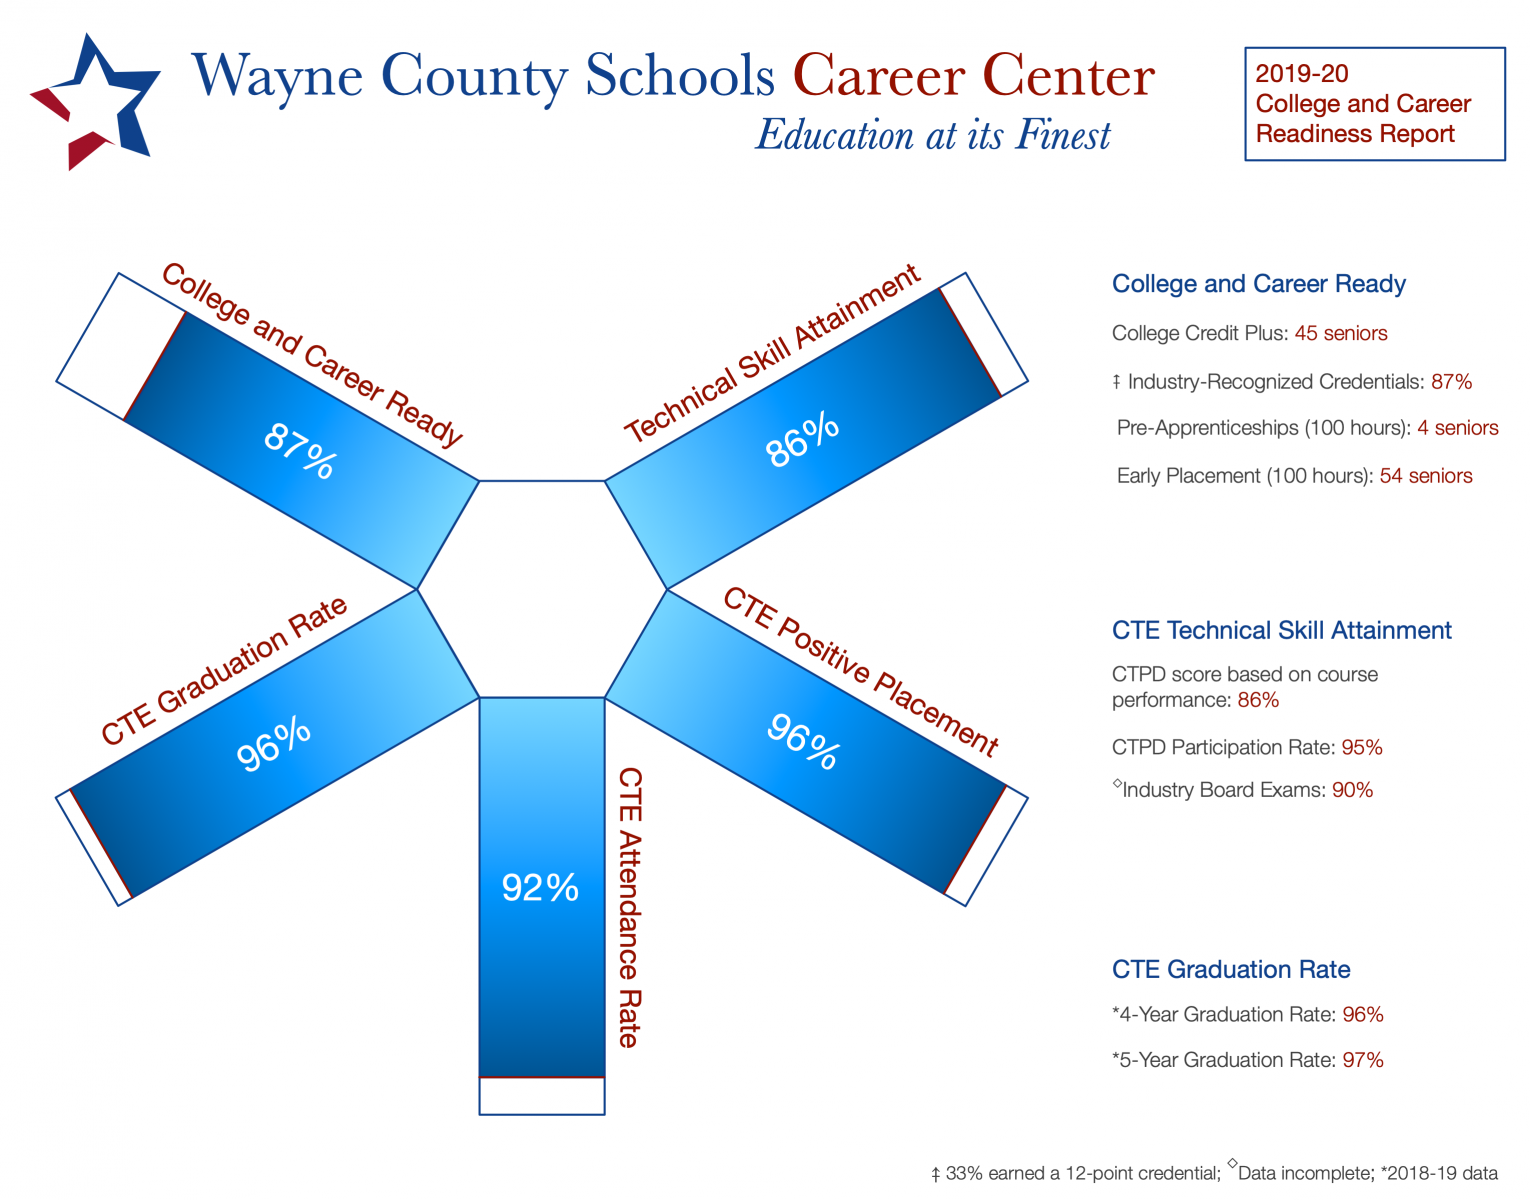 Image of WCSCC College and Career Readiness Report